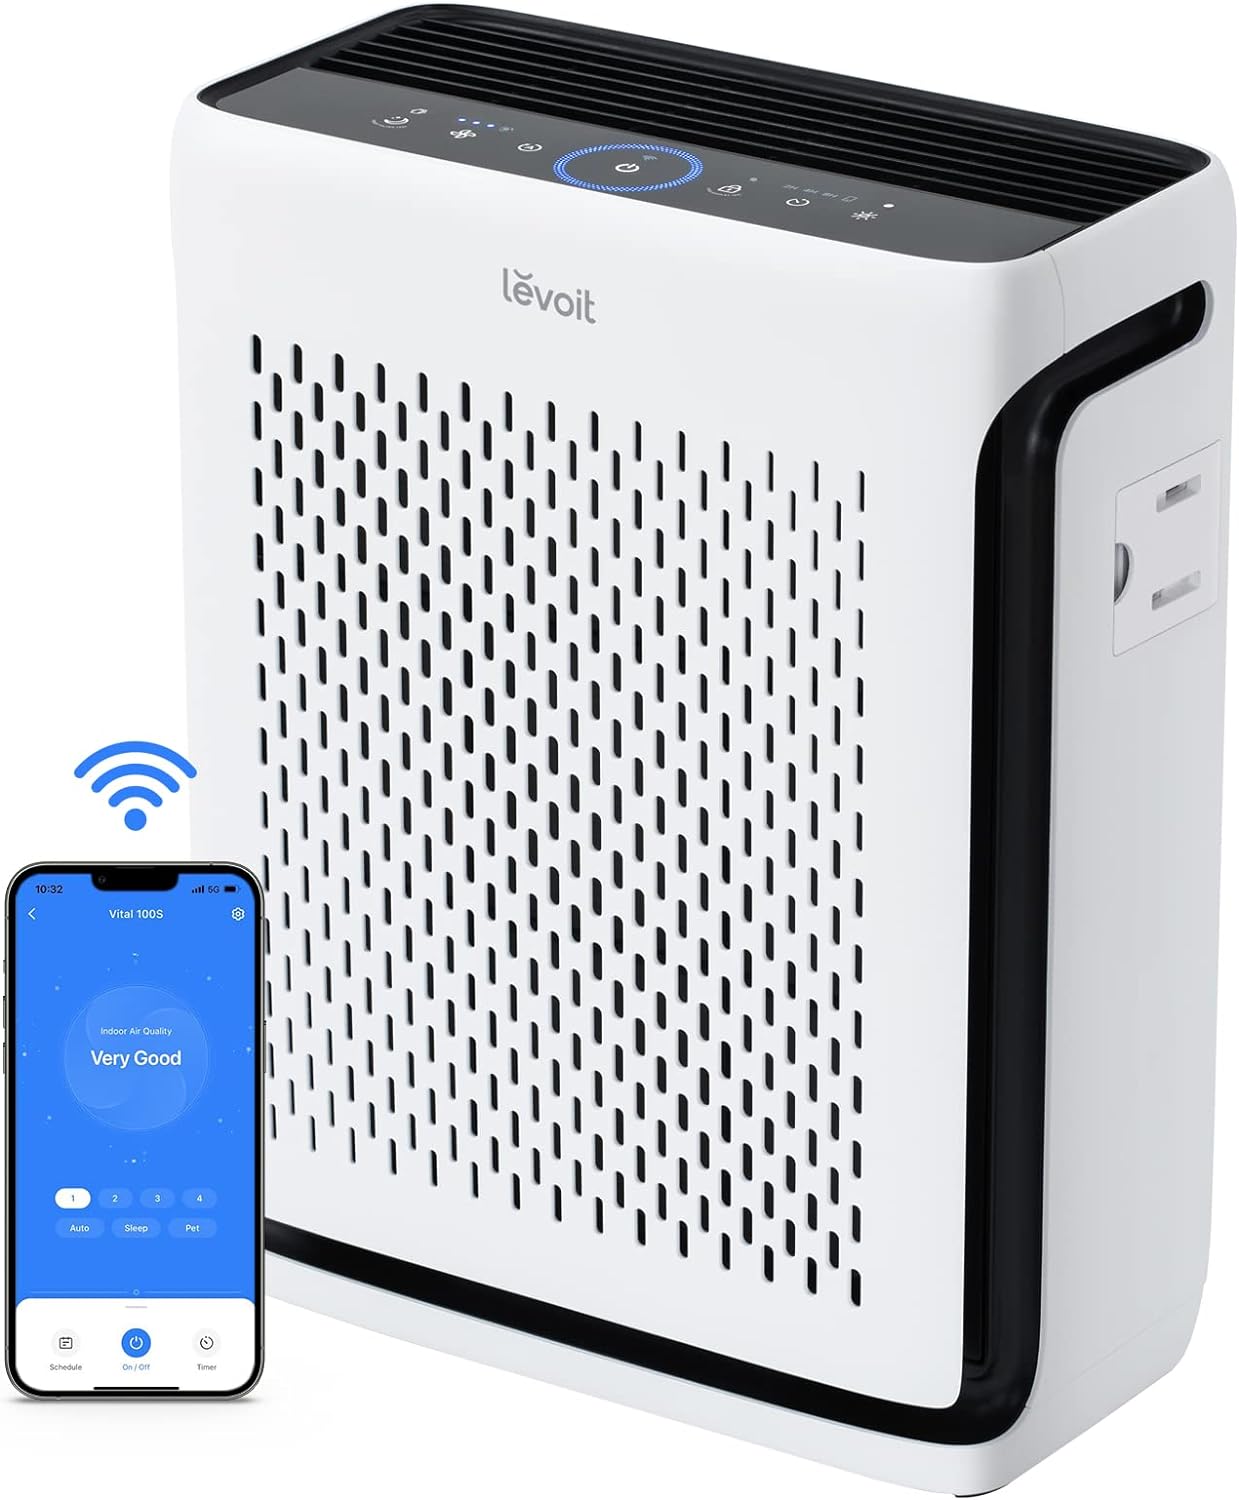 LEVOIT Air Purifiers for Home Large Room Bedroom Up to 1110 Ft with Air Quality and Light Sensors, Smart WiFi, Washable Filters, HEPA Filter for Pets, Allergy, Dust, Vital 100S / Vital 100S-P, White